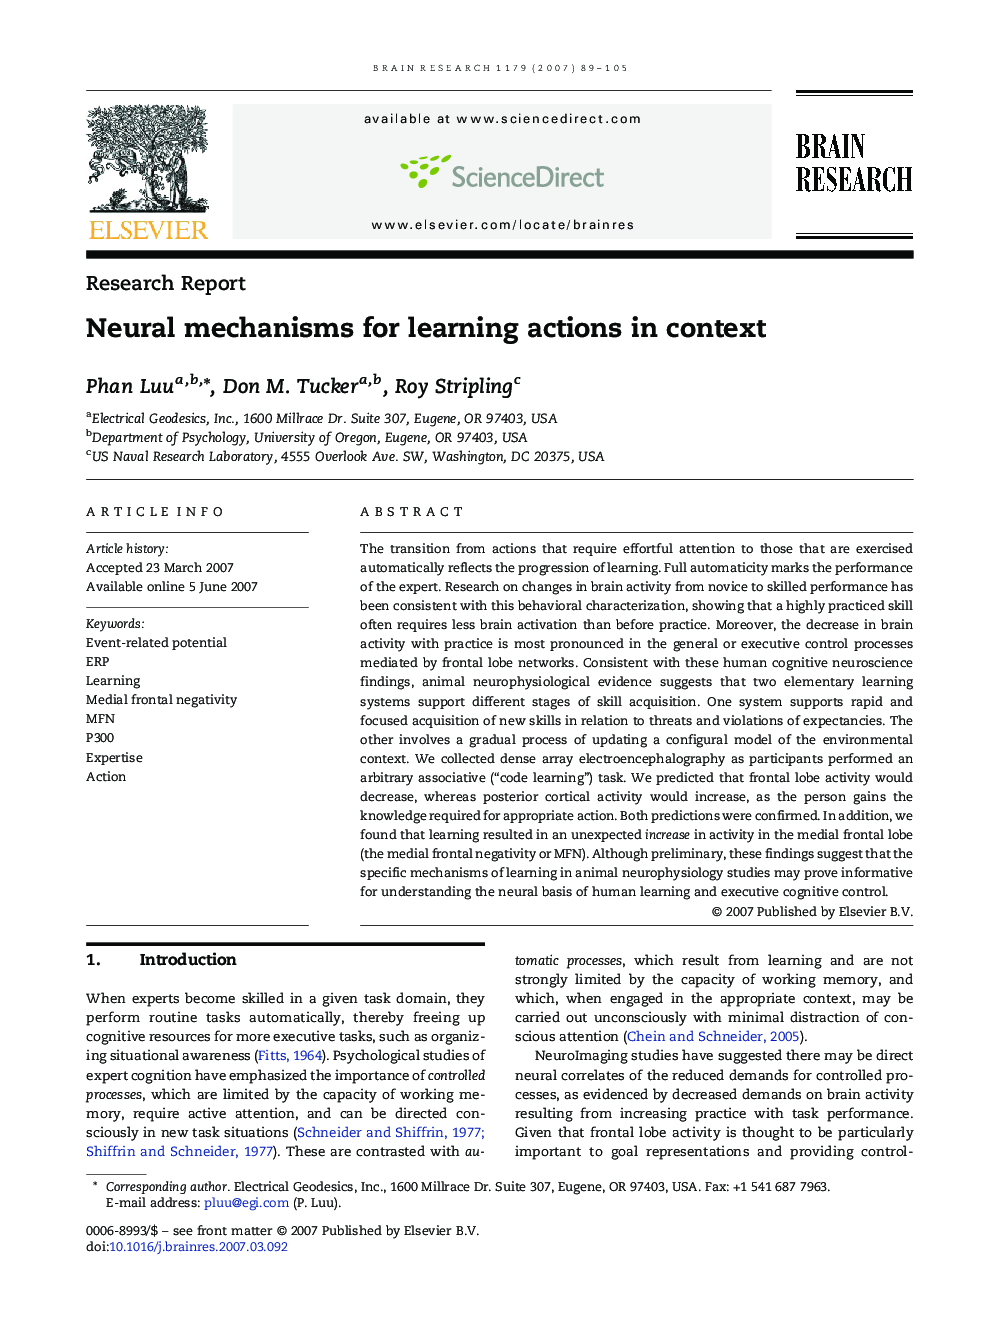 Neural mechanisms for learning actions in context